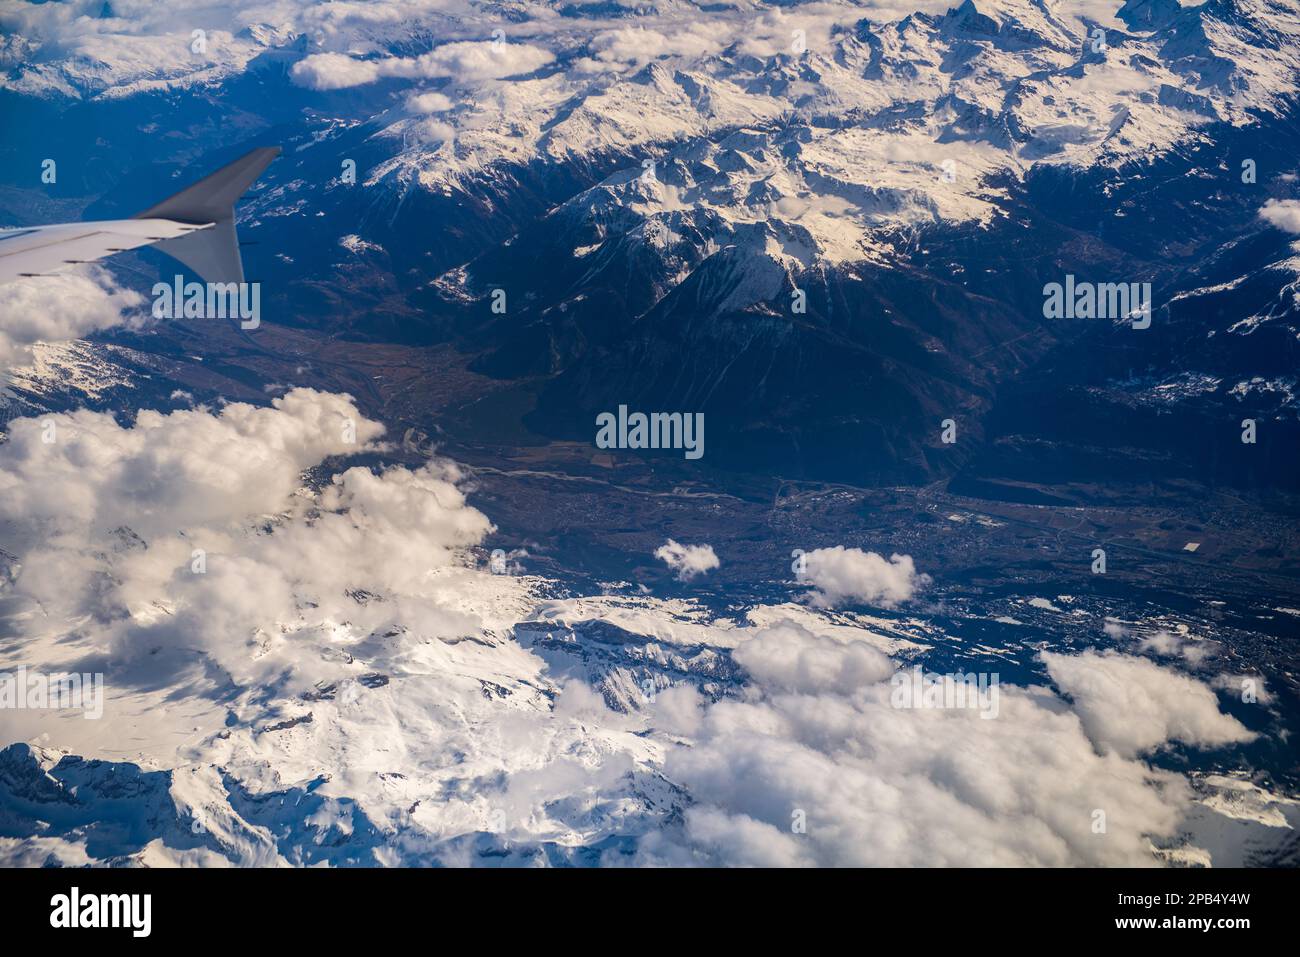 Aerial view of a town in the swiss alps Stock Photo